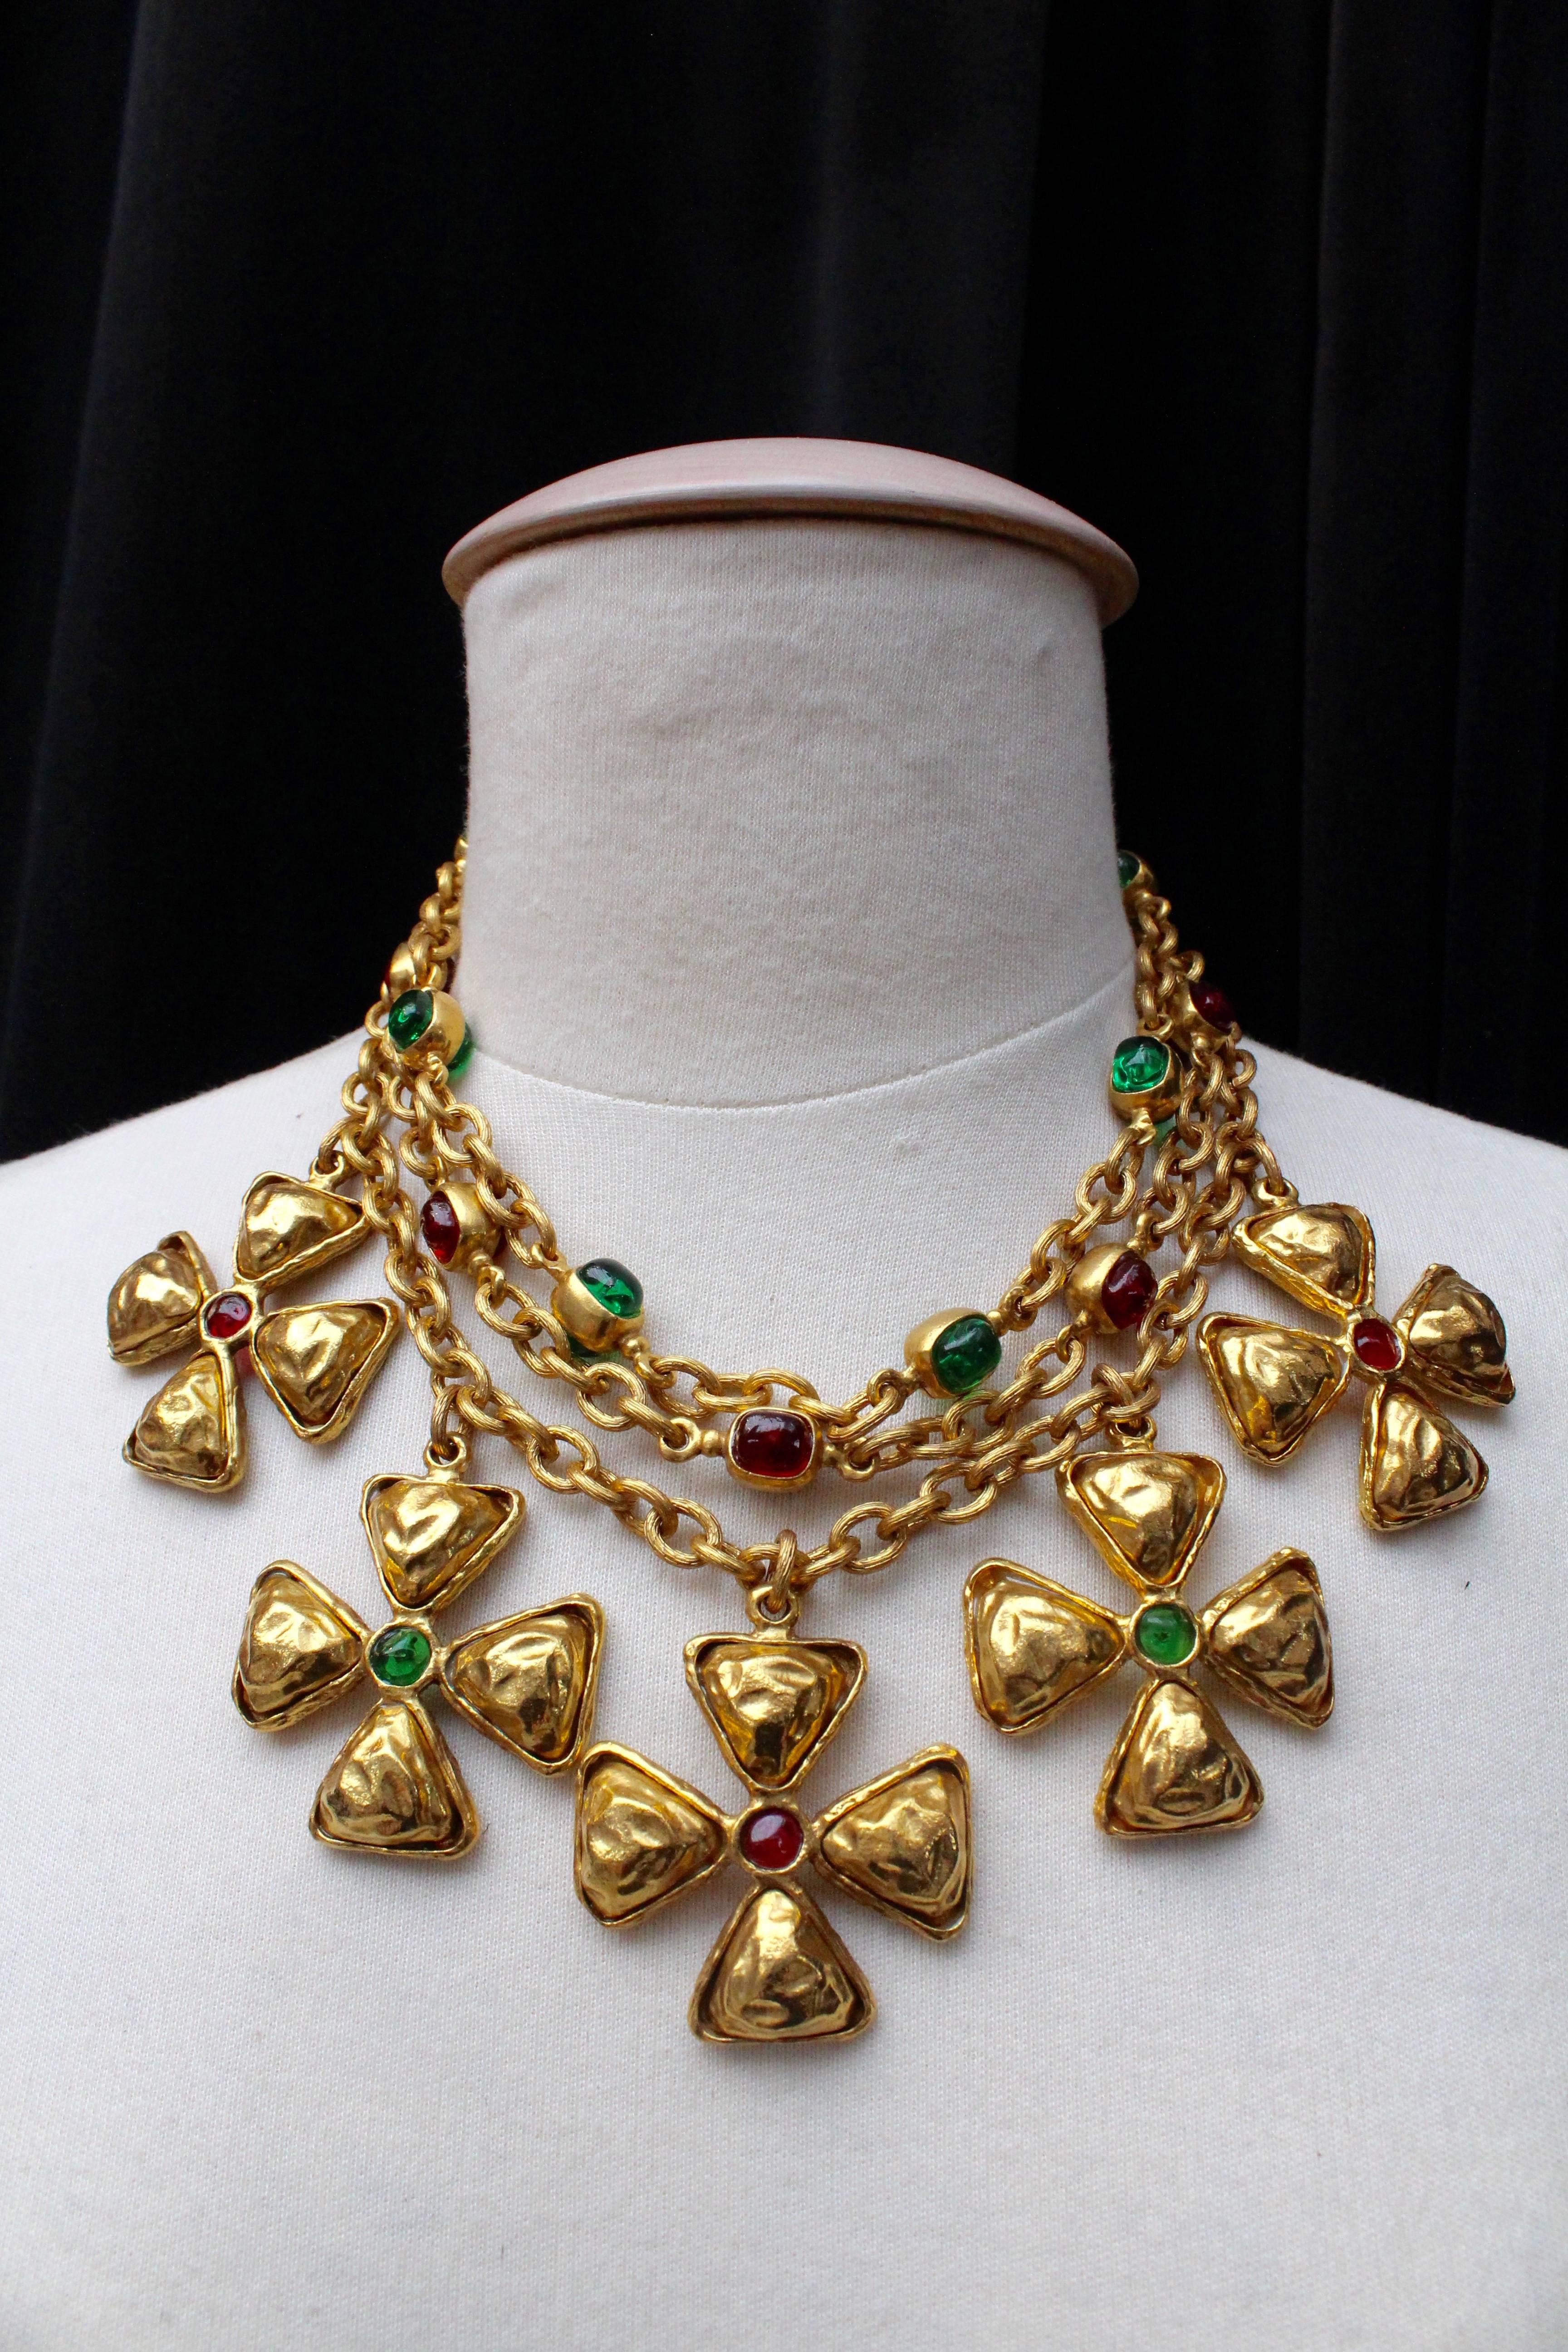 CHANEL (Made in France) Choker comprised of three strands of gilded metal chain decorated on the two shortest strands with emerald and ruby glass paste cabochons set in gilded metal.  Five pendants representing Maltese cross are hanging from the